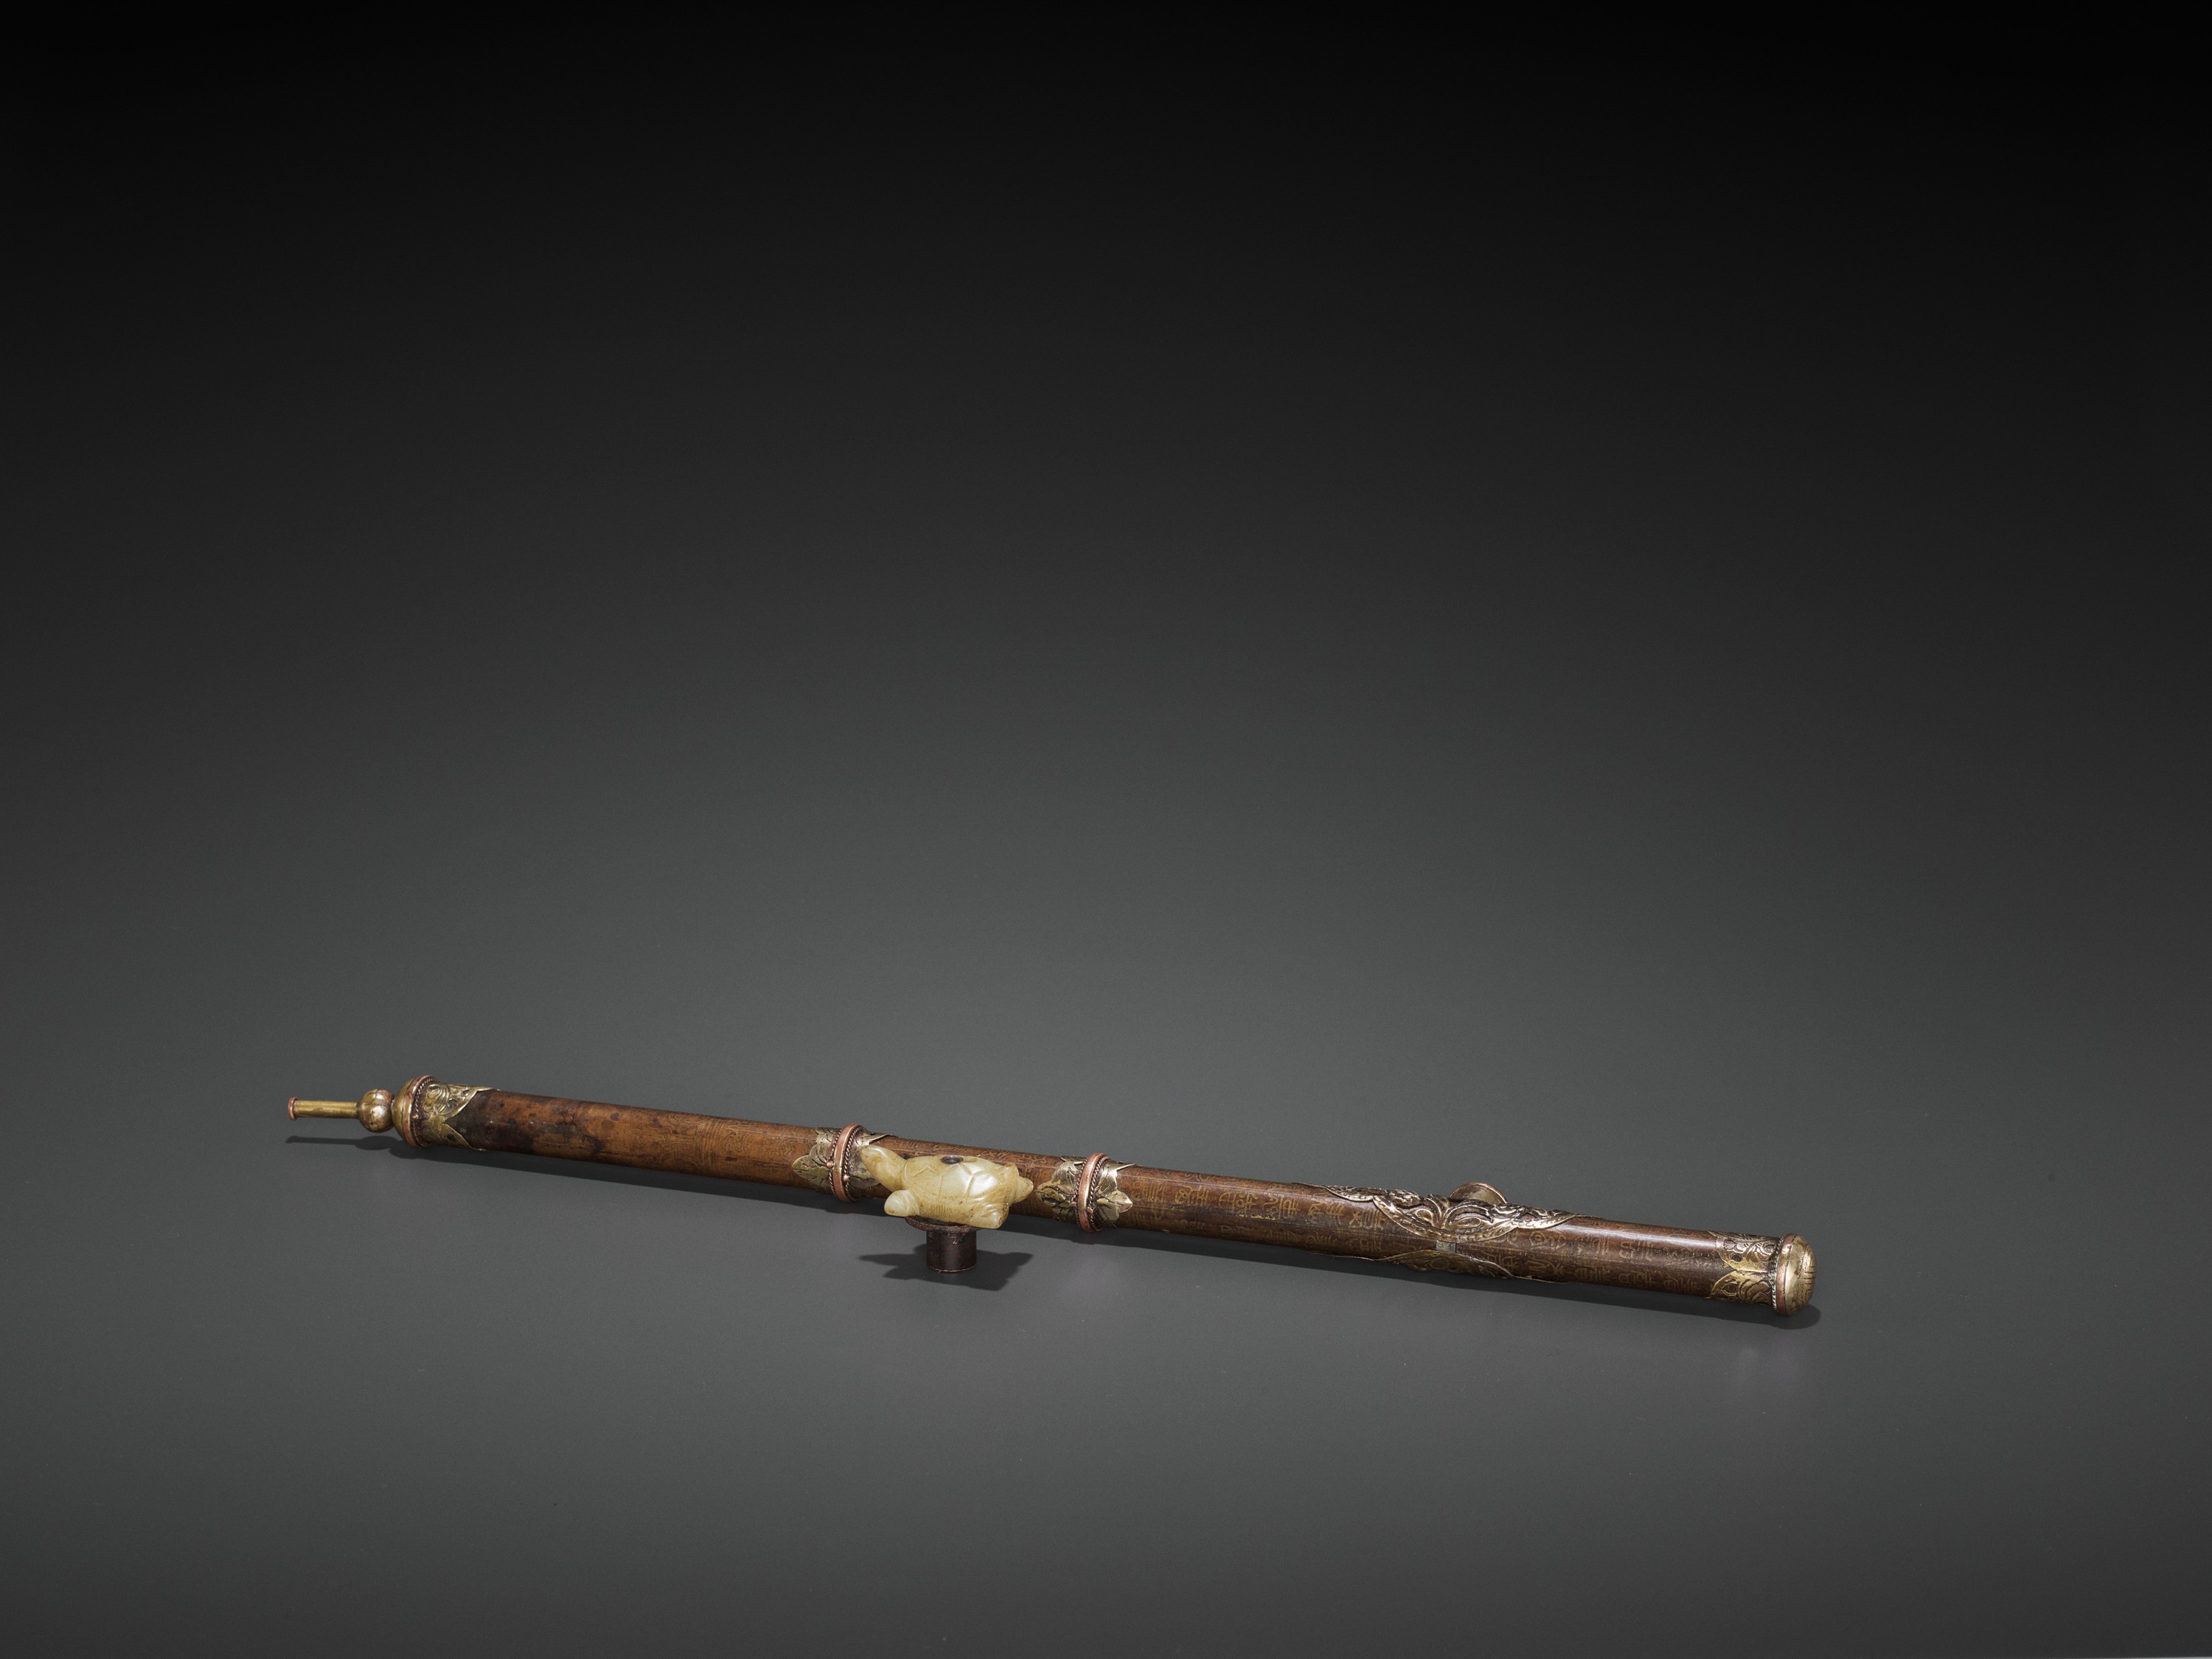 AN INSCRIBED BRONZE OPIUM PIPE WITH SILVER AND COPPER FITTINGS, LATE QING TO REPUBLIC - Image 7 of 8